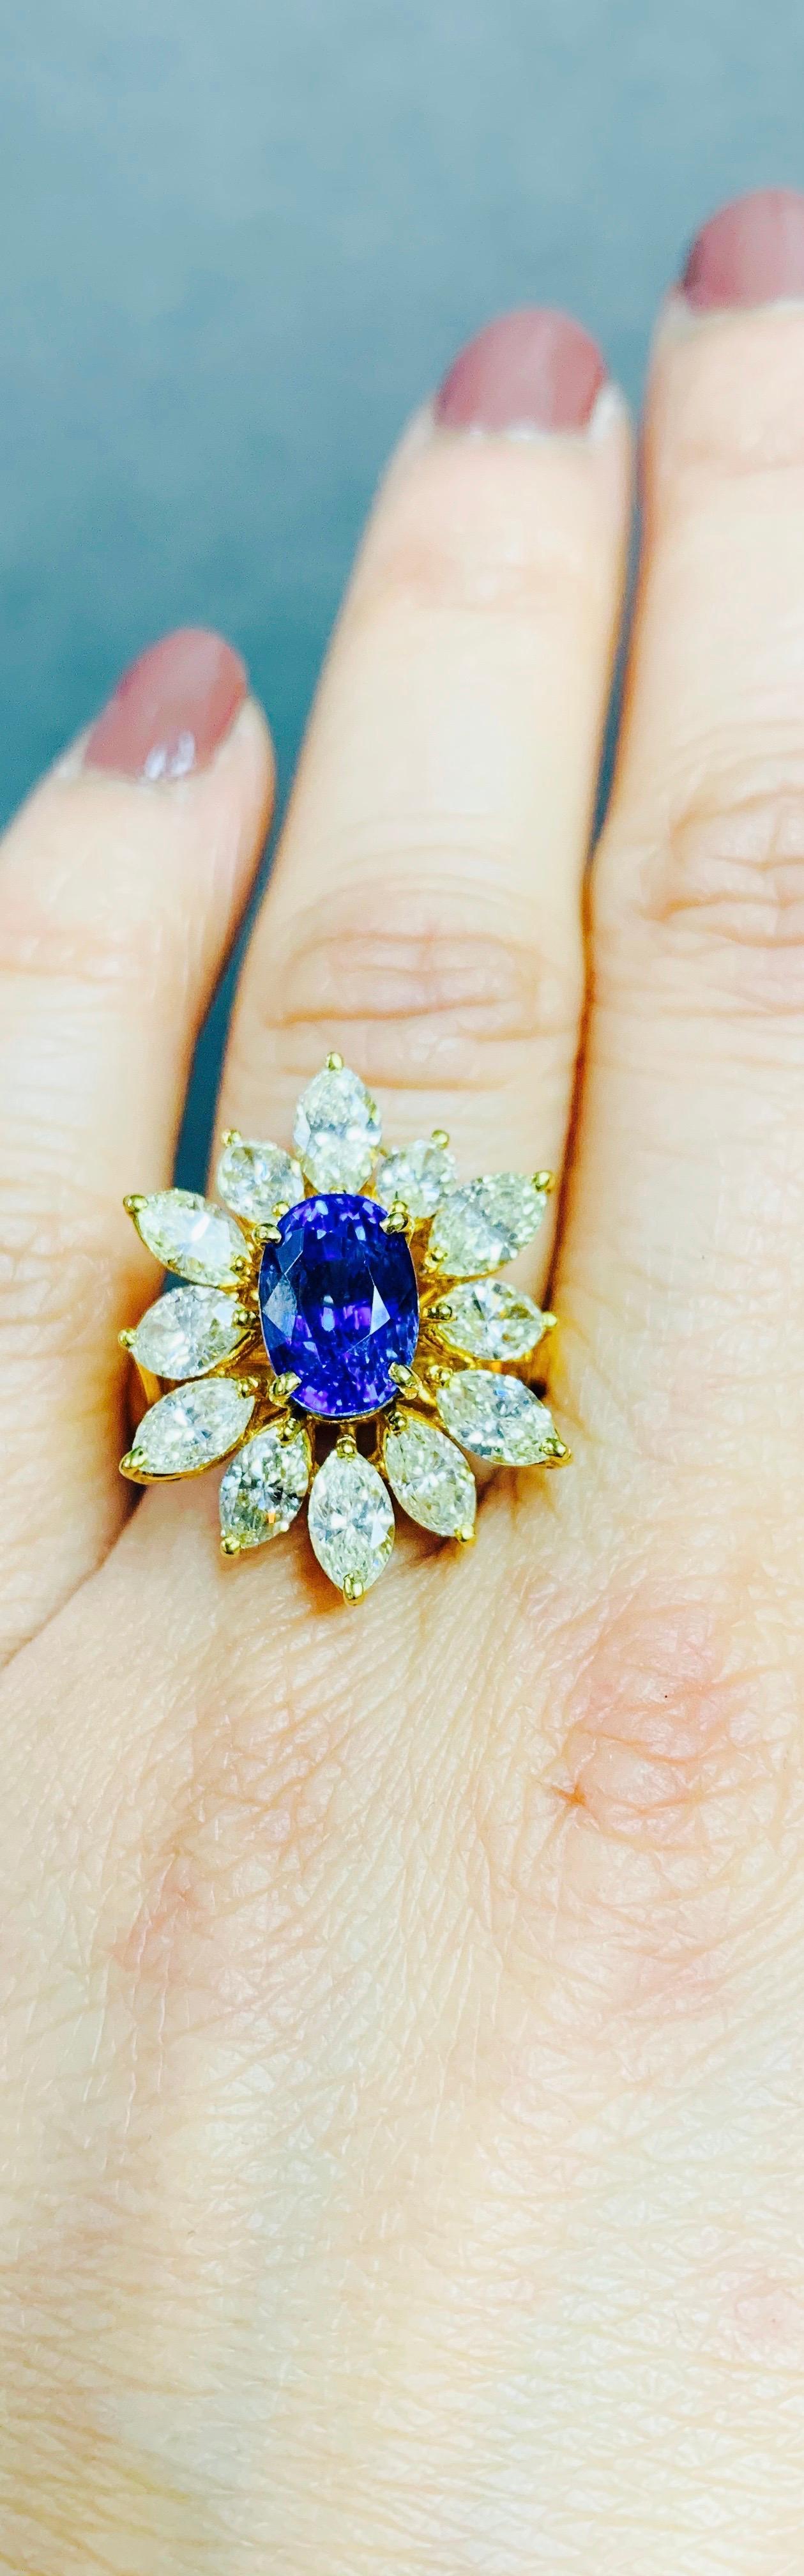 blue and yellow diamond ring